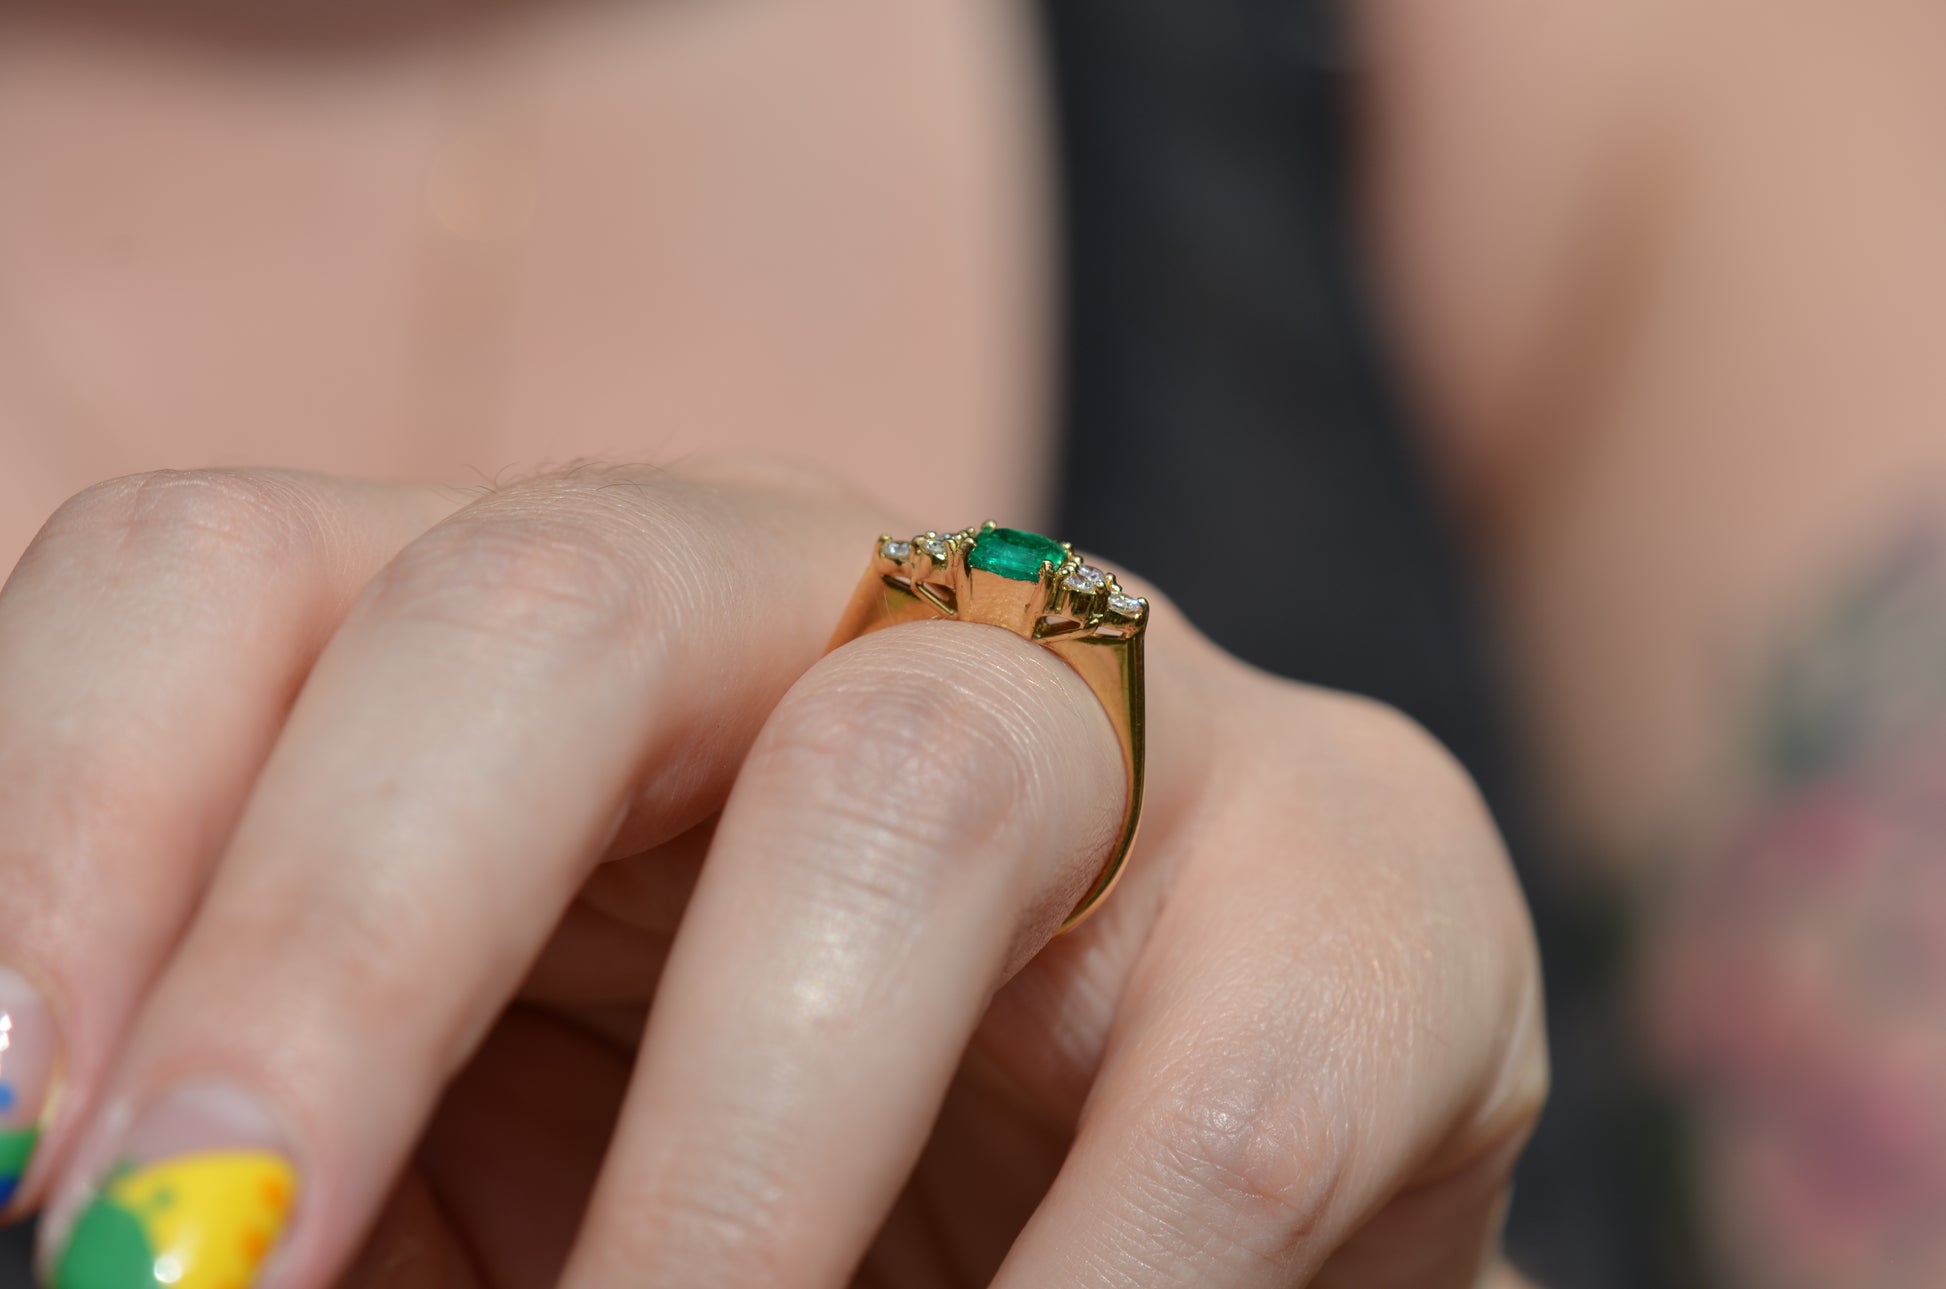 Medium-close photo of the vintage ring on the hand of a Caucasian model's left ring finger in order to show scale when worn. View is highlighting the gallery of the ring and the rise off the finger.